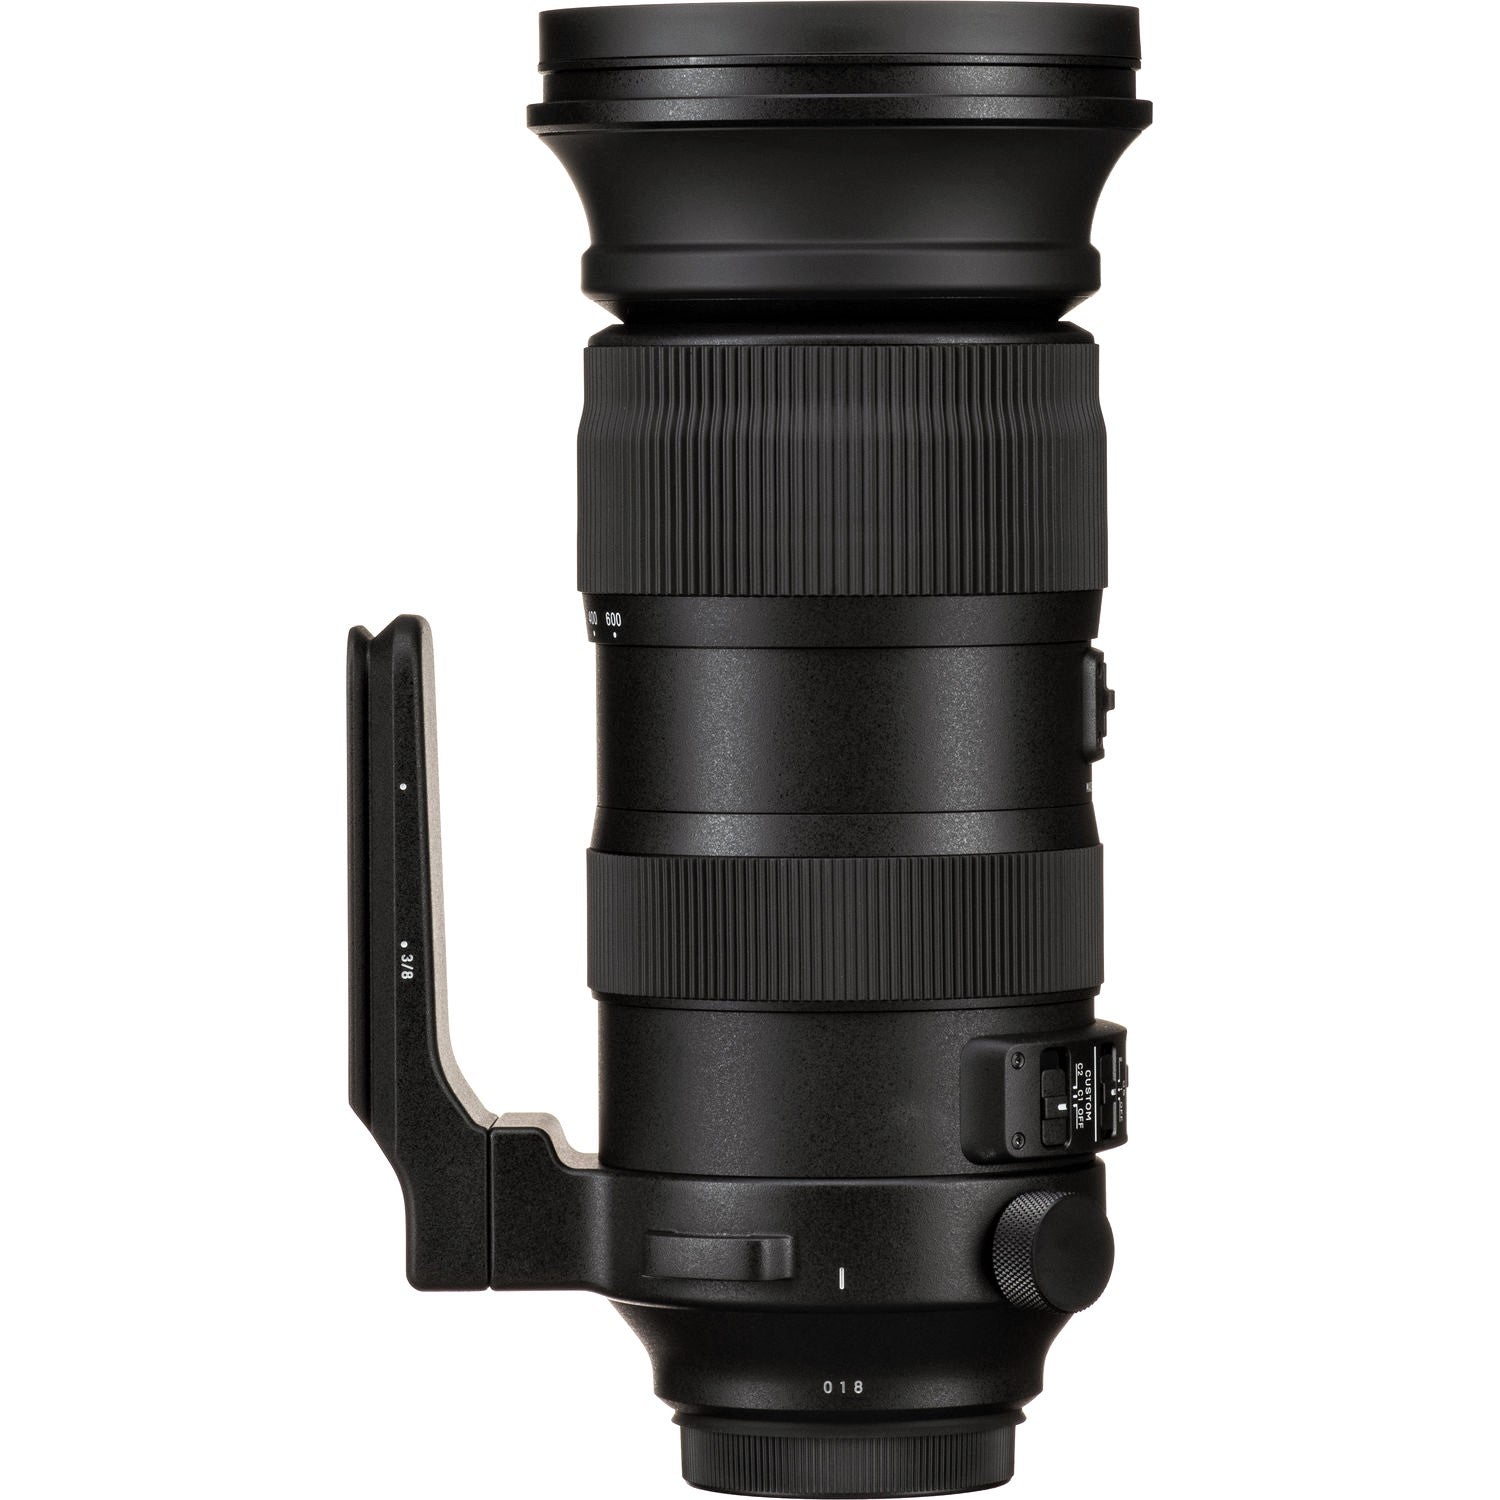 Sigma 60-600mm F4.5-6.3 DG OS HSM Sports Lens for Canon EF with Attached Tripod Mount on the Left